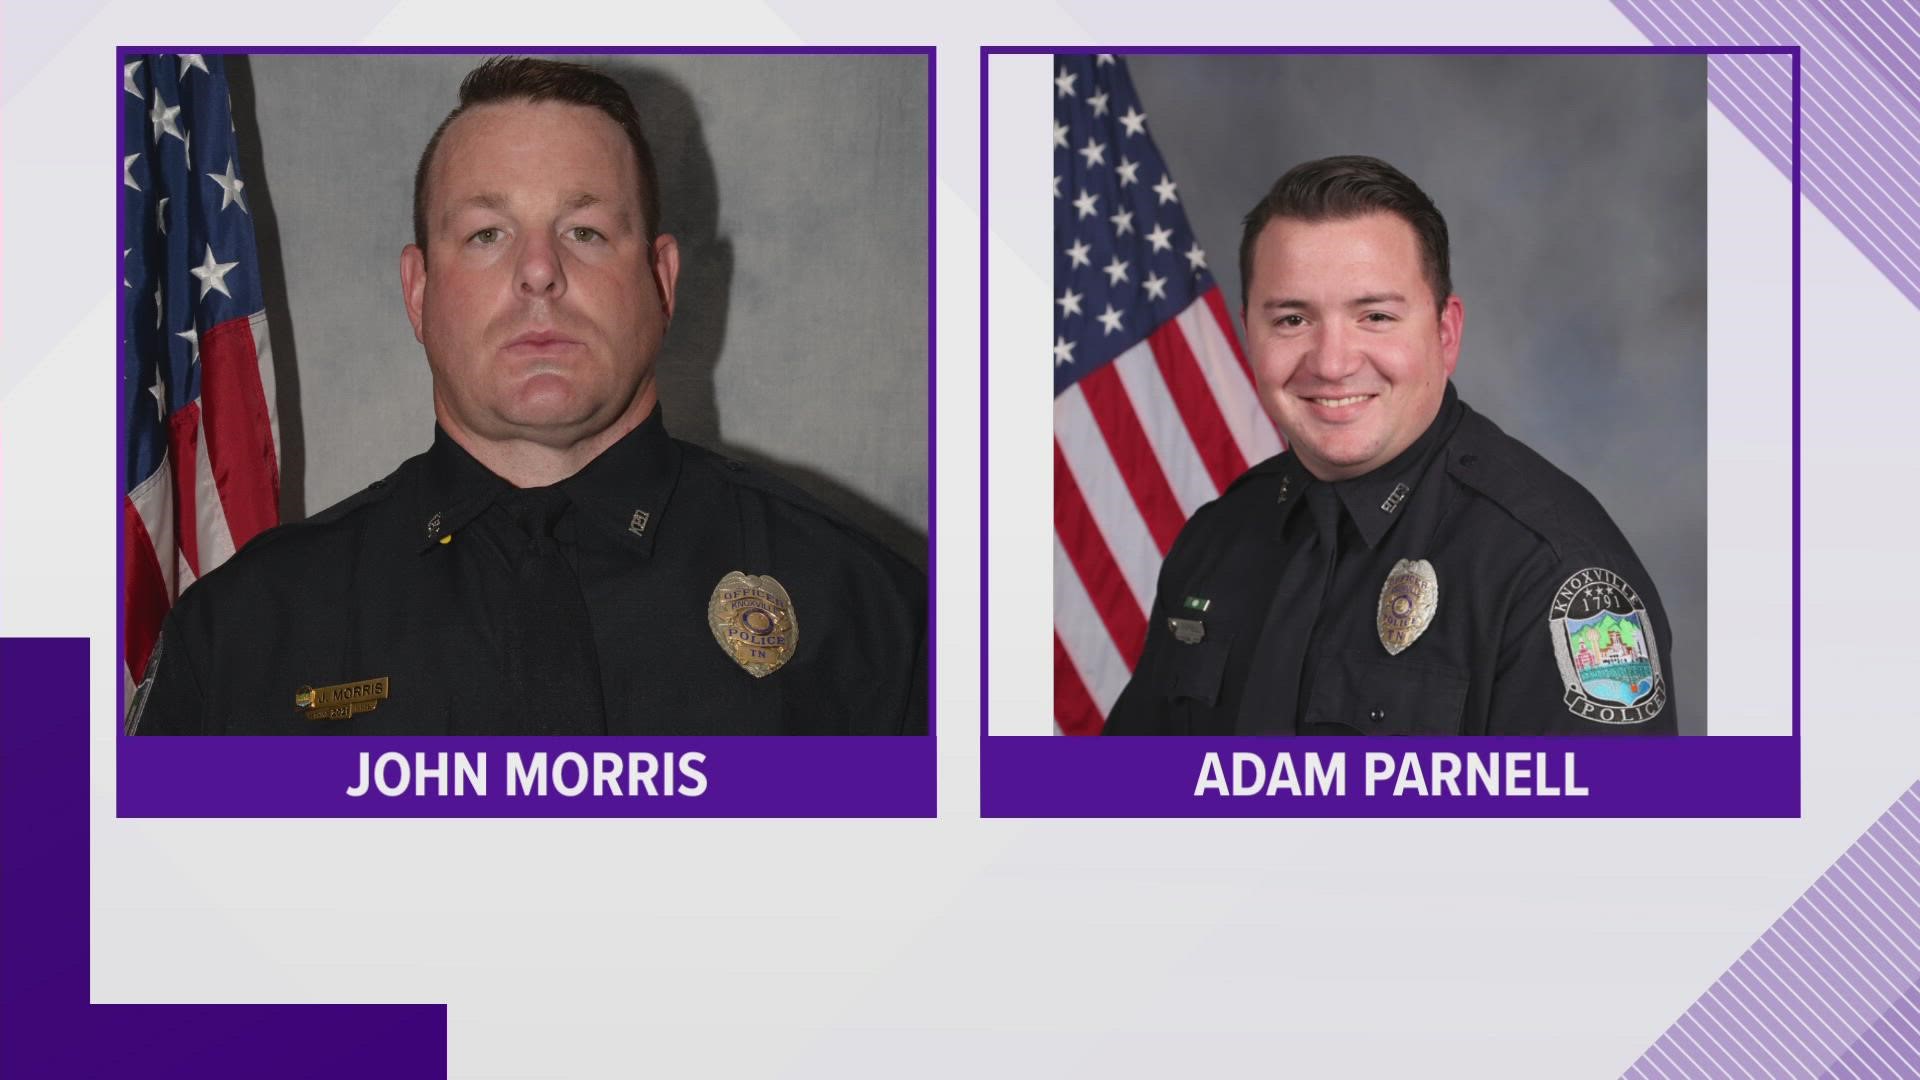 Officer Adam Parnell was arrested by the Jefferson City Police Department, and Officer John Morris was arrested by the Pigeon Forge Police Department.